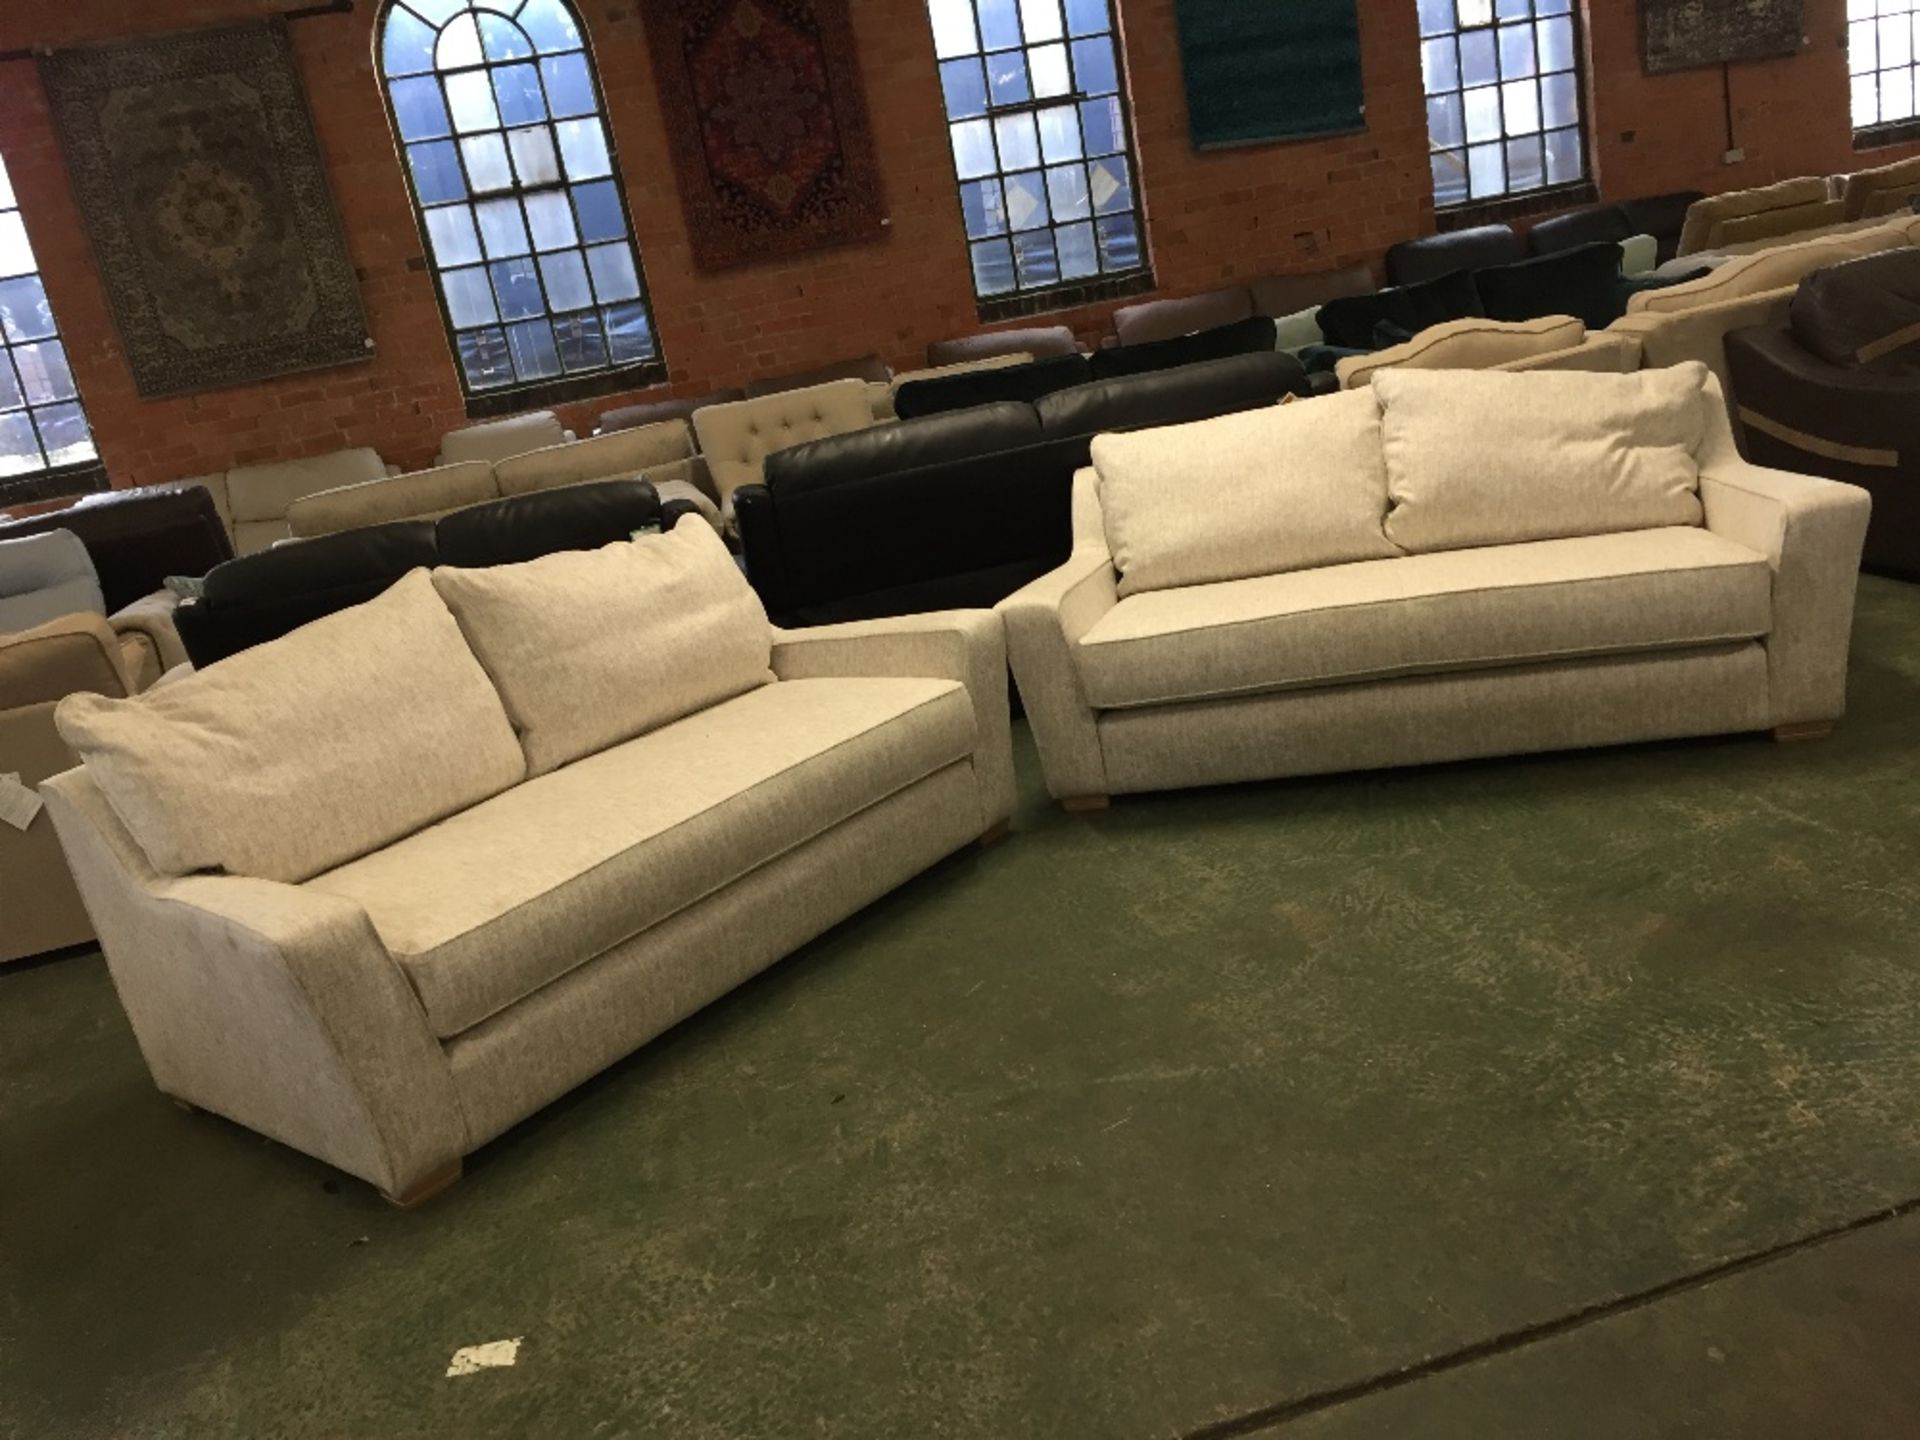 2 X NATURAL PATTERNED LARGE 2 SEATER SOFAS (TROO14